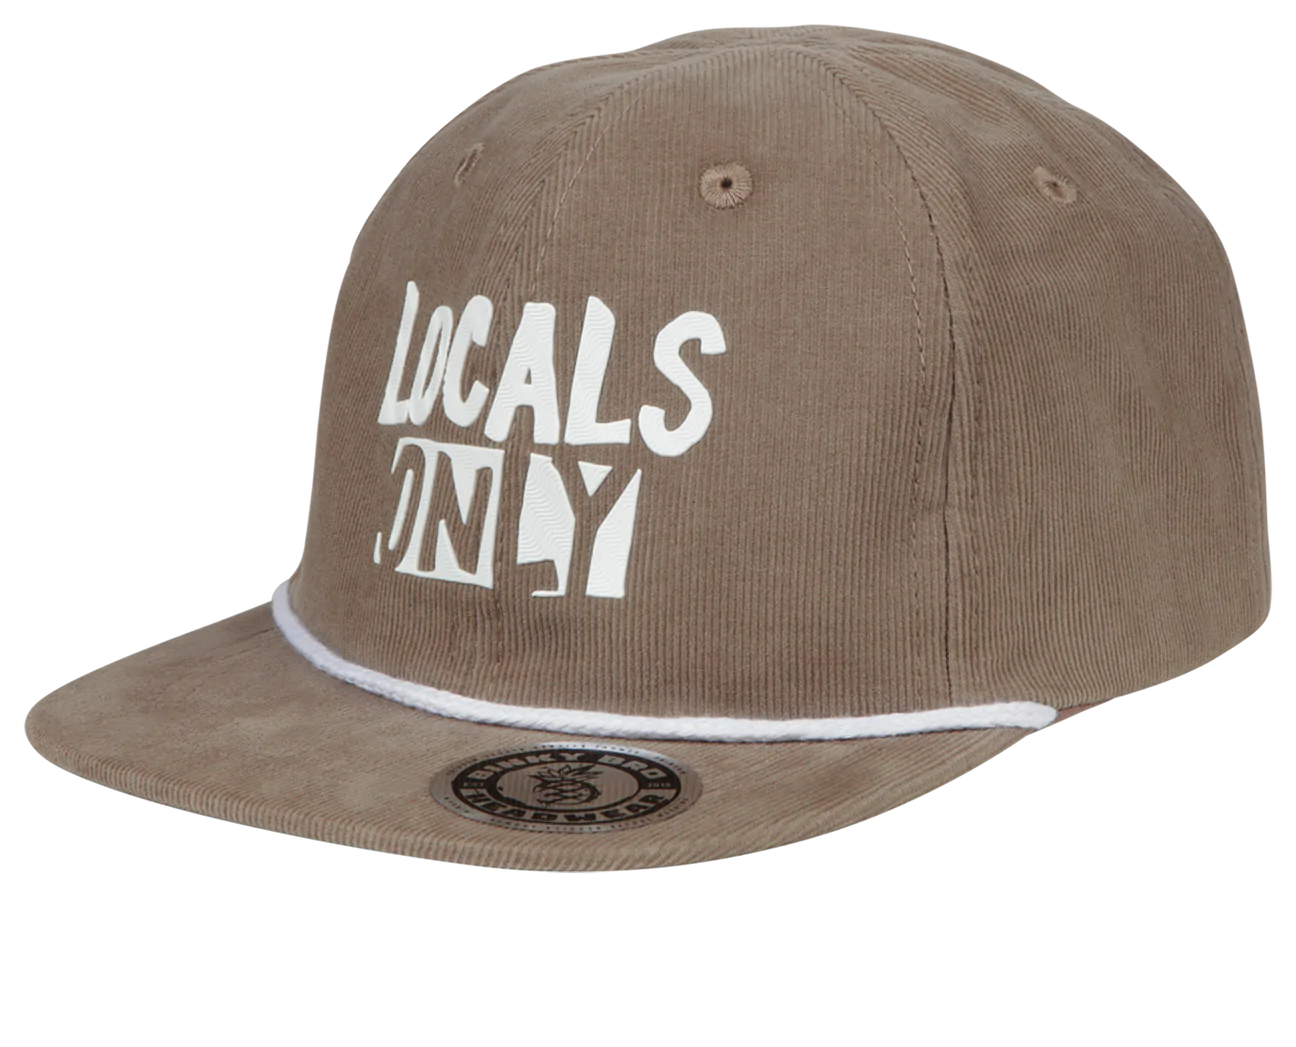 Snapback - Locals Only